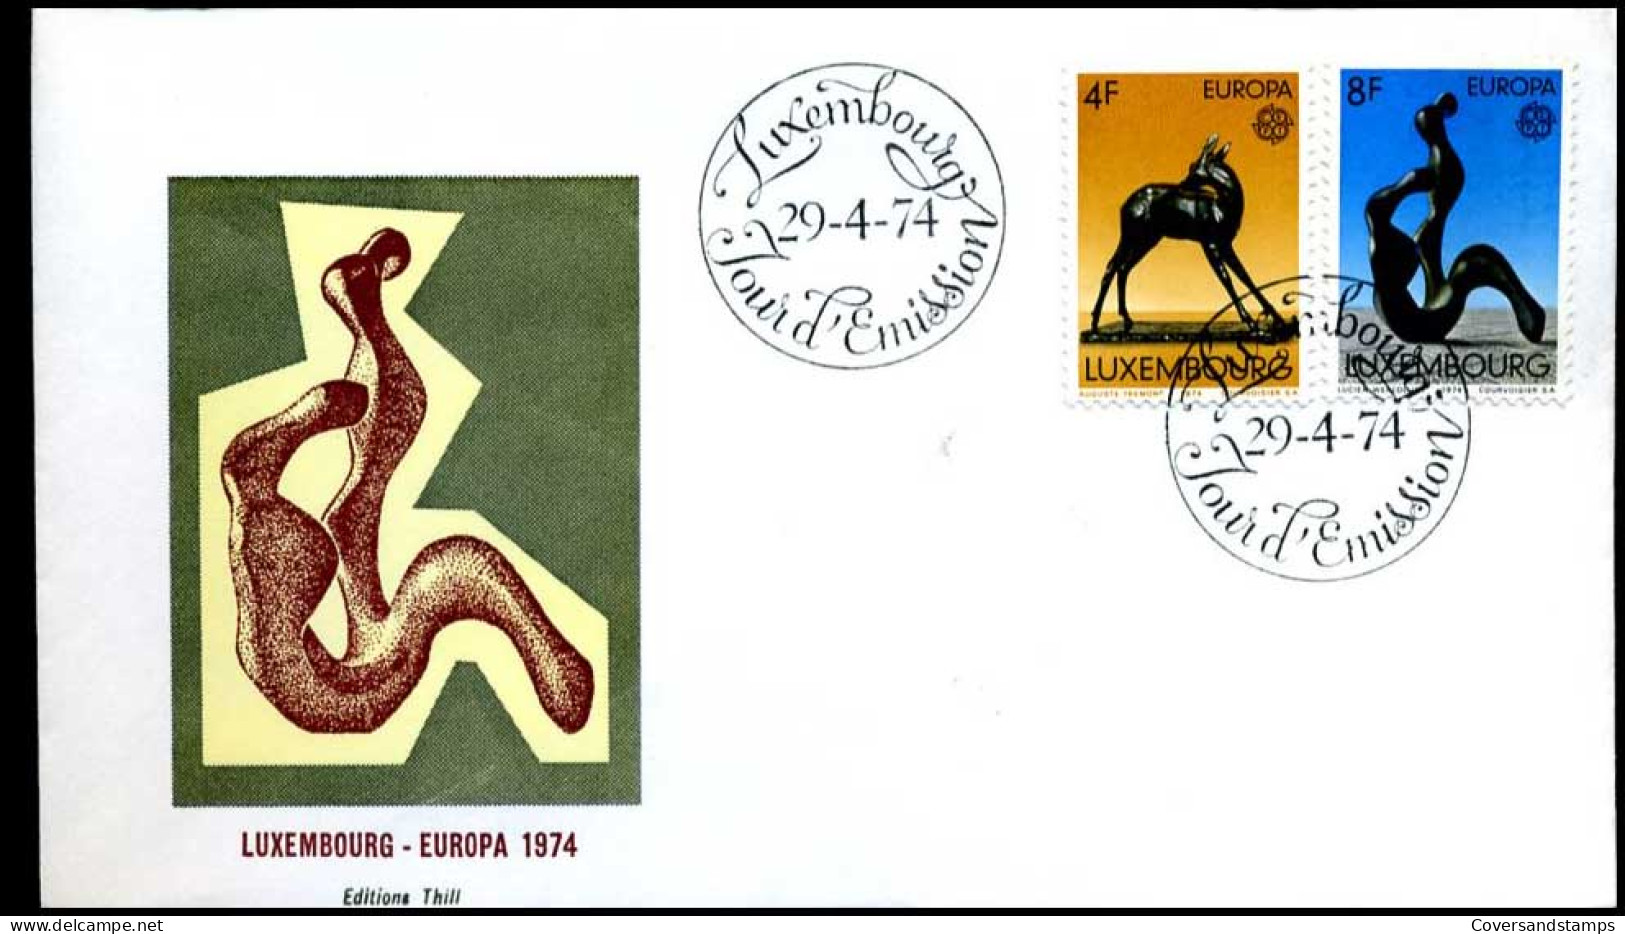  Luxembourg - FDC - Europa CEPT 1974 - 1974